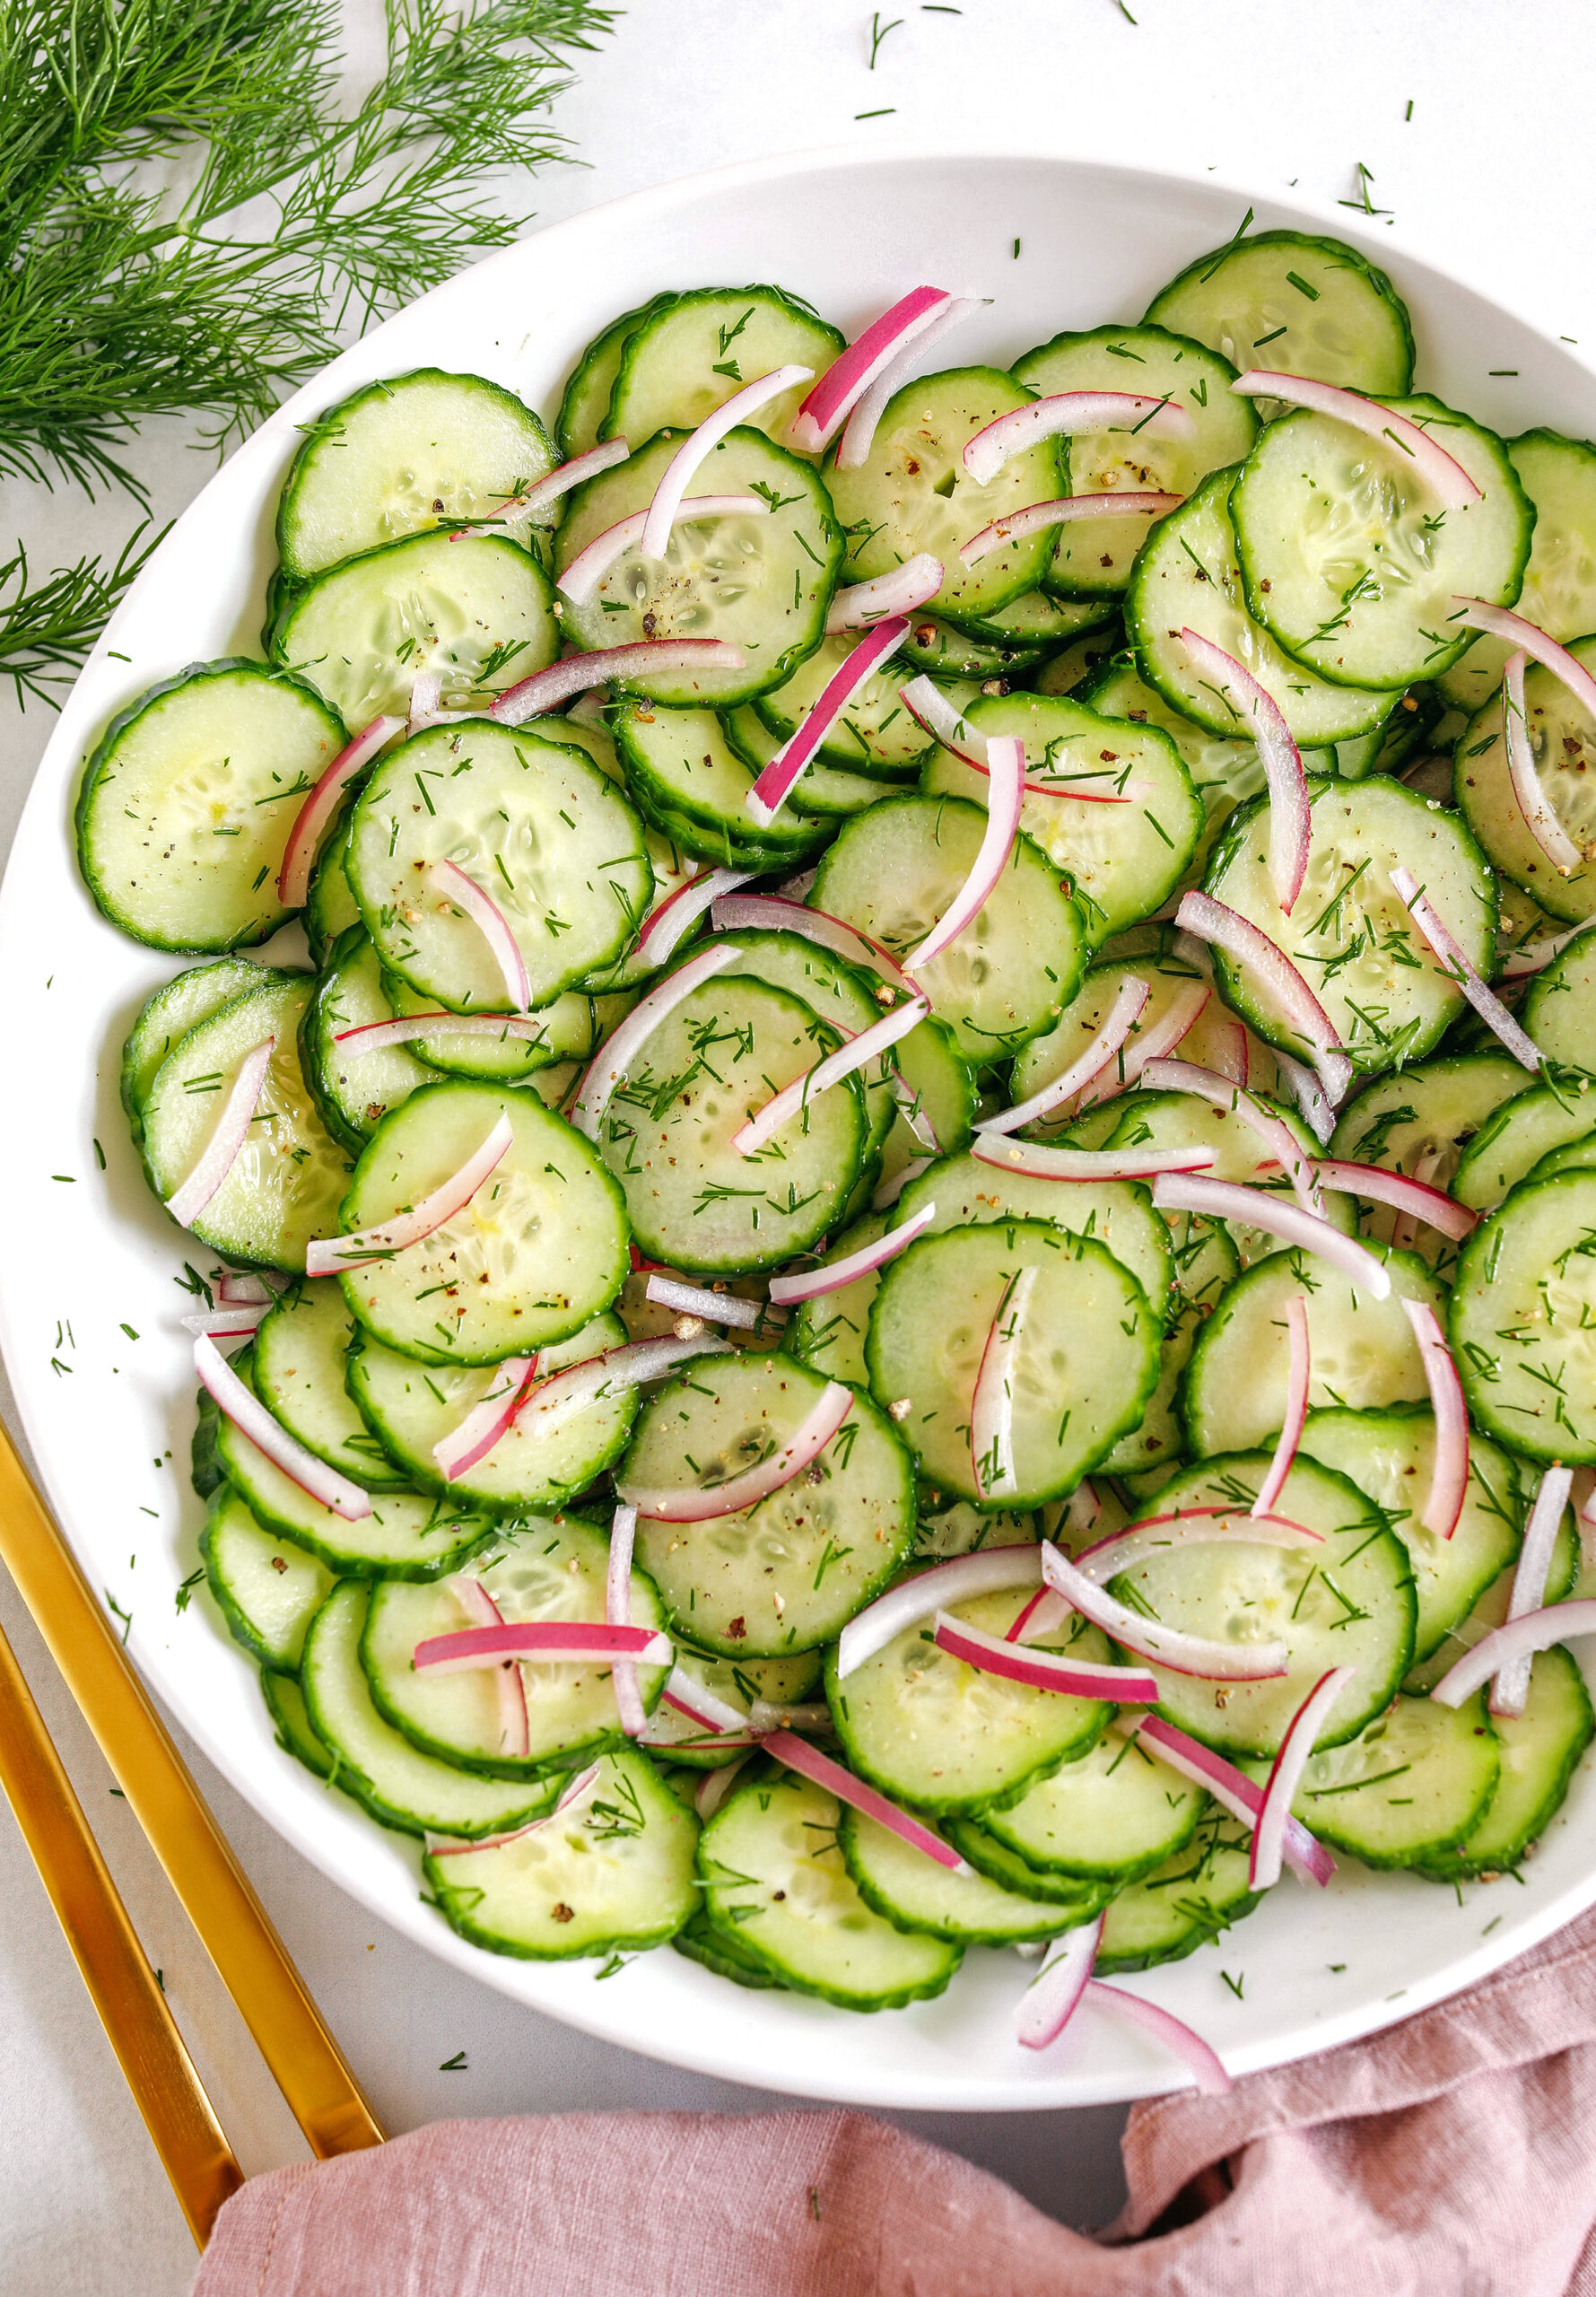 This Sweet Cucumber Salad is made with crisp cucumbers, slices of red onion and fresh dill all tossed in a sweet and tangy vinaigrette that easily comes together in less than 10 minutes!  Perfect summer side dish that is light and refreshing!